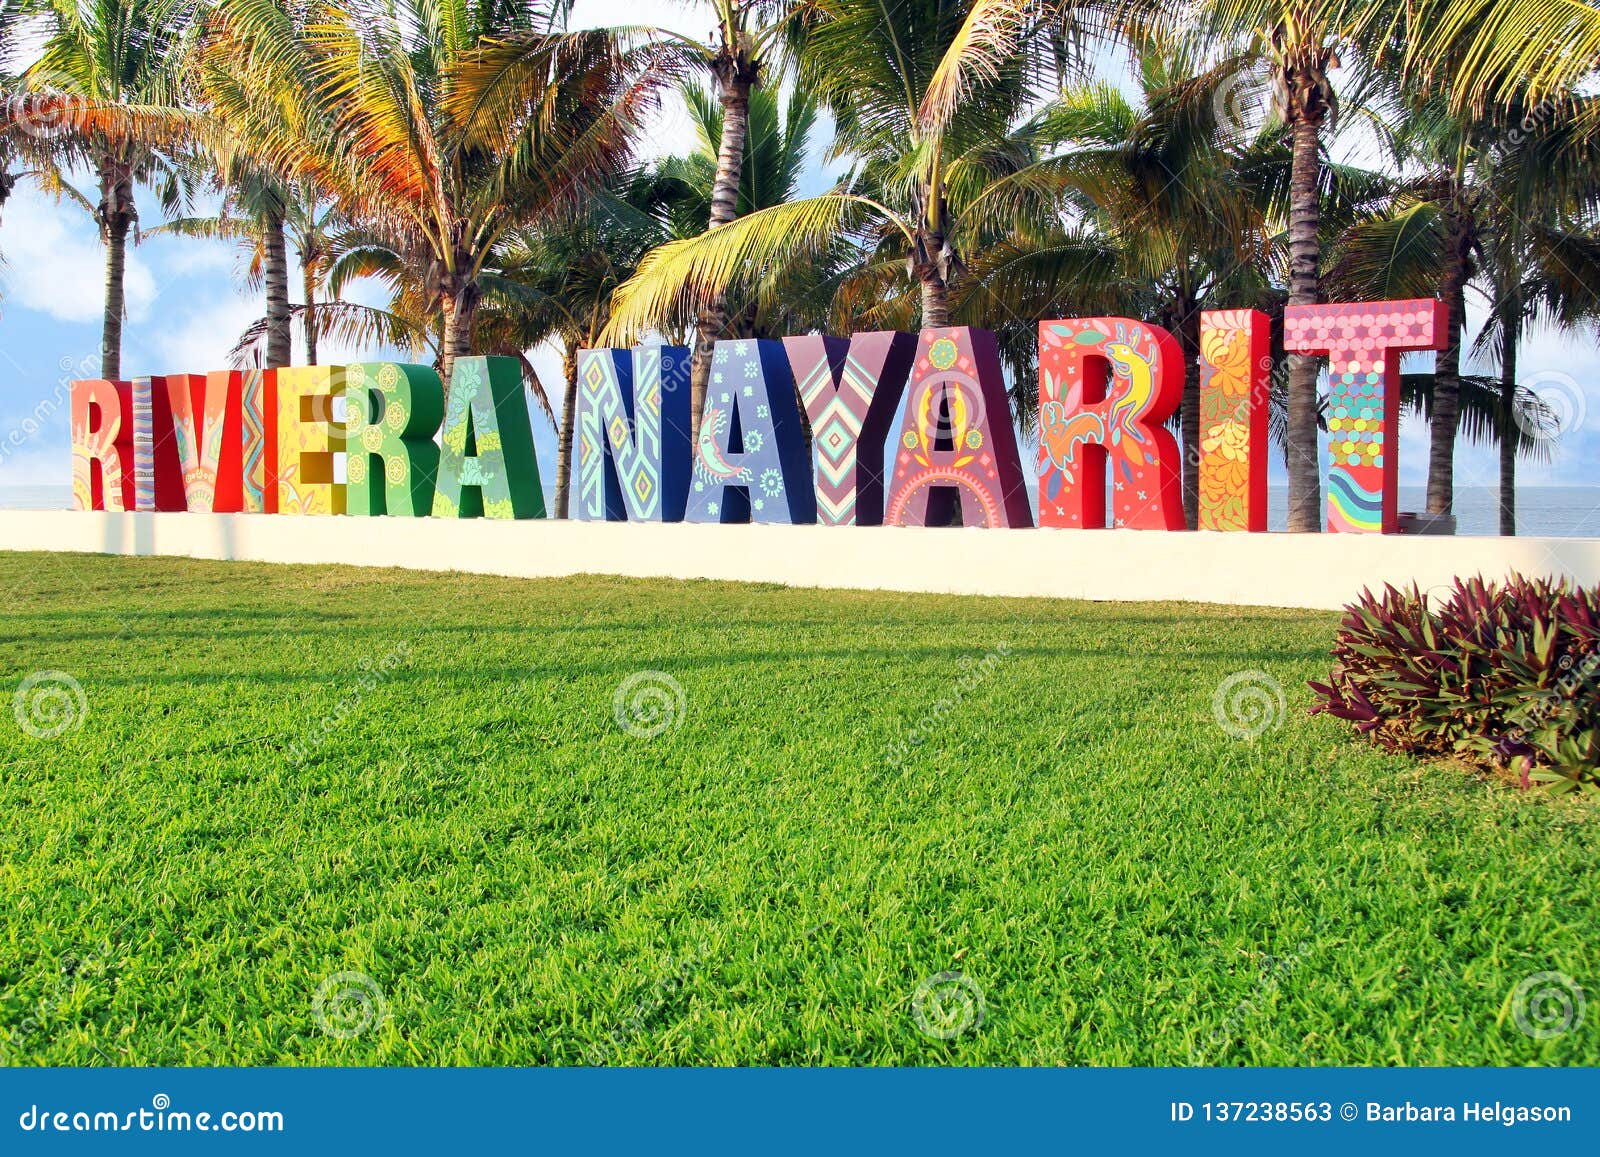 colorfully painted riviera nayarit sign on a public beach in mexico. translation: coastline nayarit.